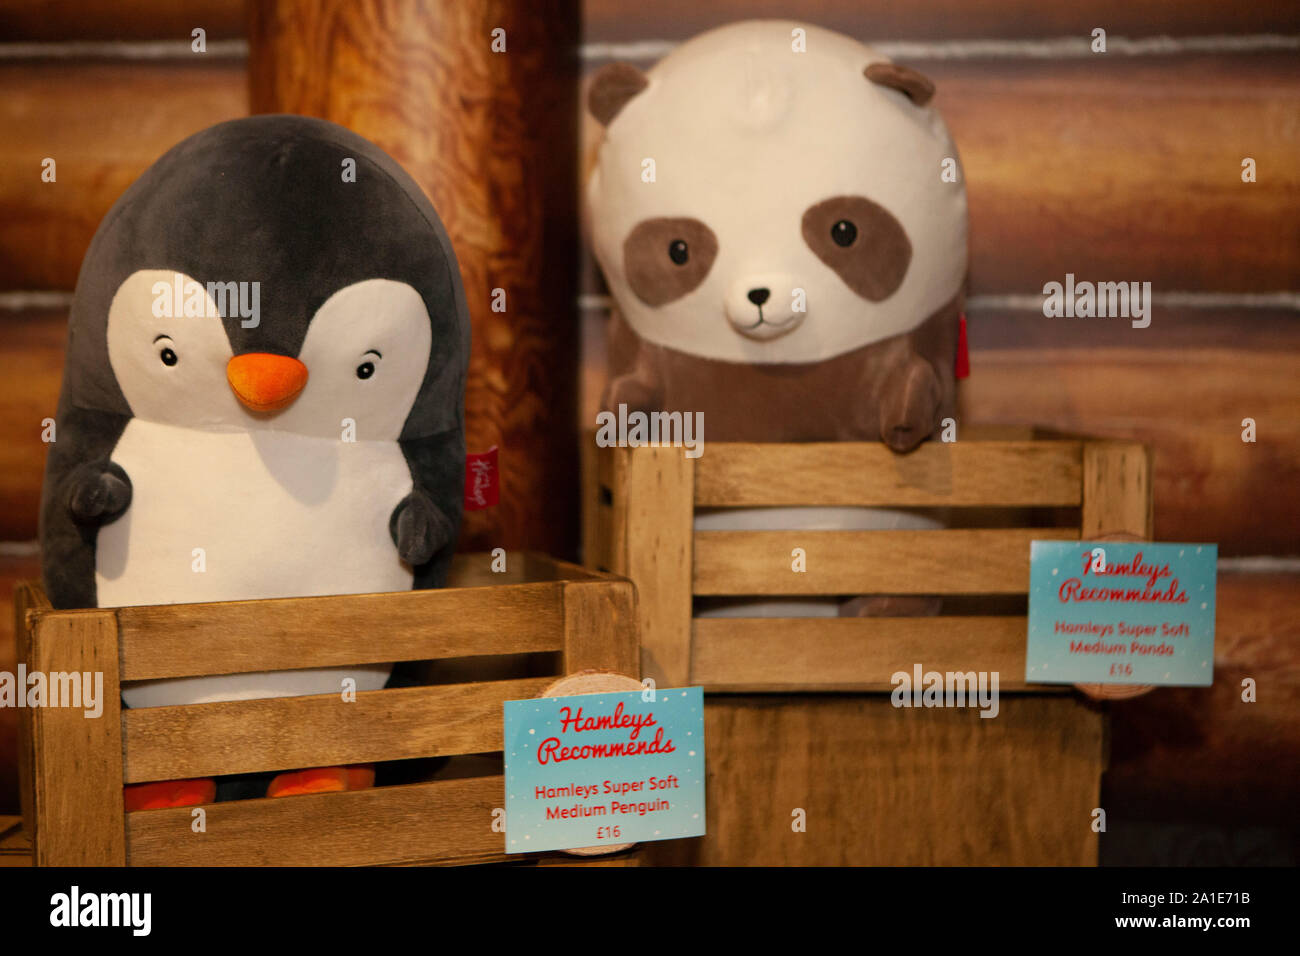 Hamleys launched of their 10 Toys For Christmas, including these Hamleys Super Soft plush penguins and pandas. Stock Photo